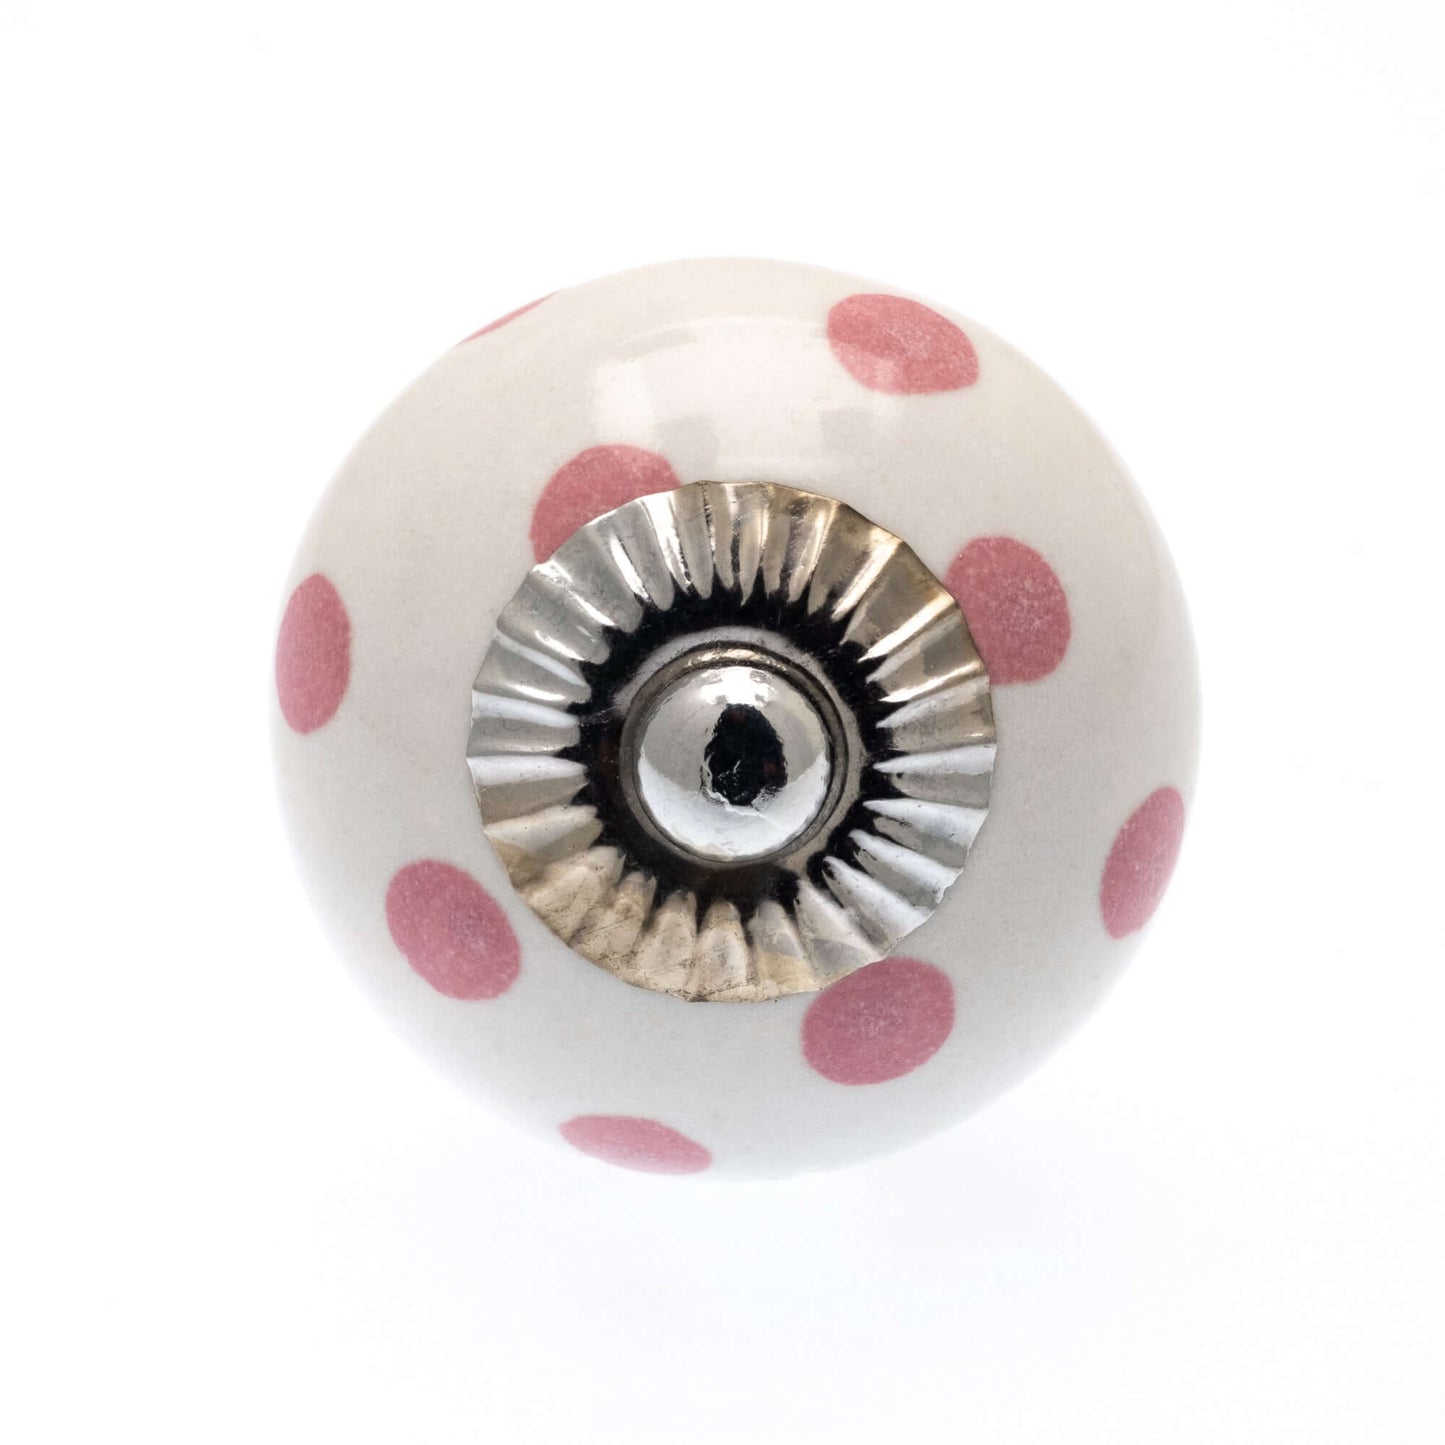 Ceramic Cupboard Knob White with Dusty Pink Spots